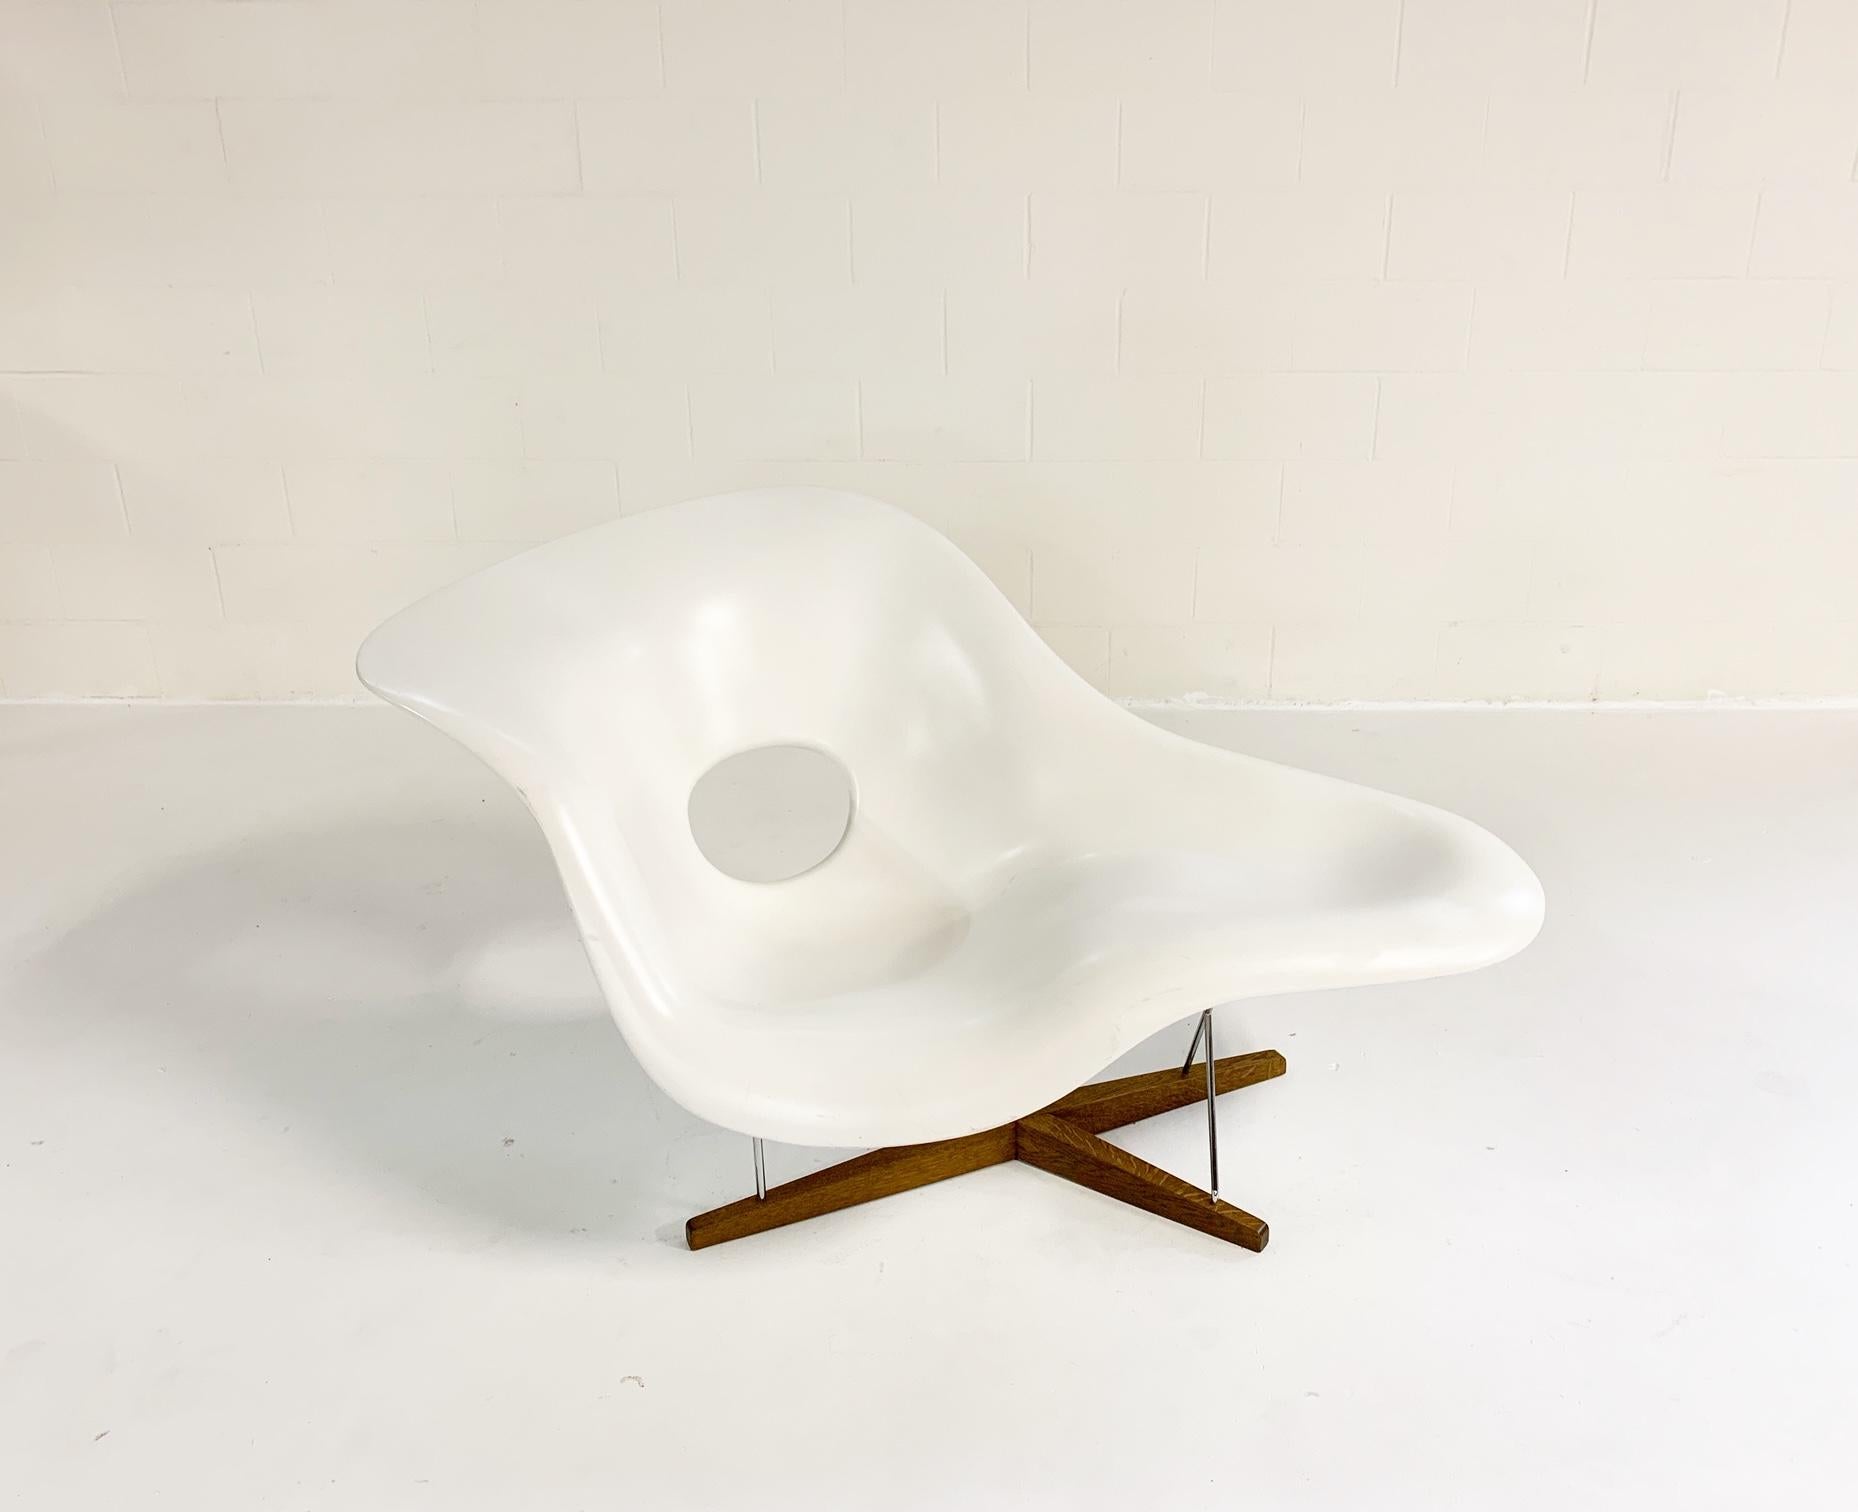 Charles and Ray Eames designed this lounge chair for The Museum of Modern Art’s 1948 “International Competition for Low-Cost Furniture Design.” Its name references both its function as well as Gaston Lachaise’s Floating Figure sculpture, whose shape